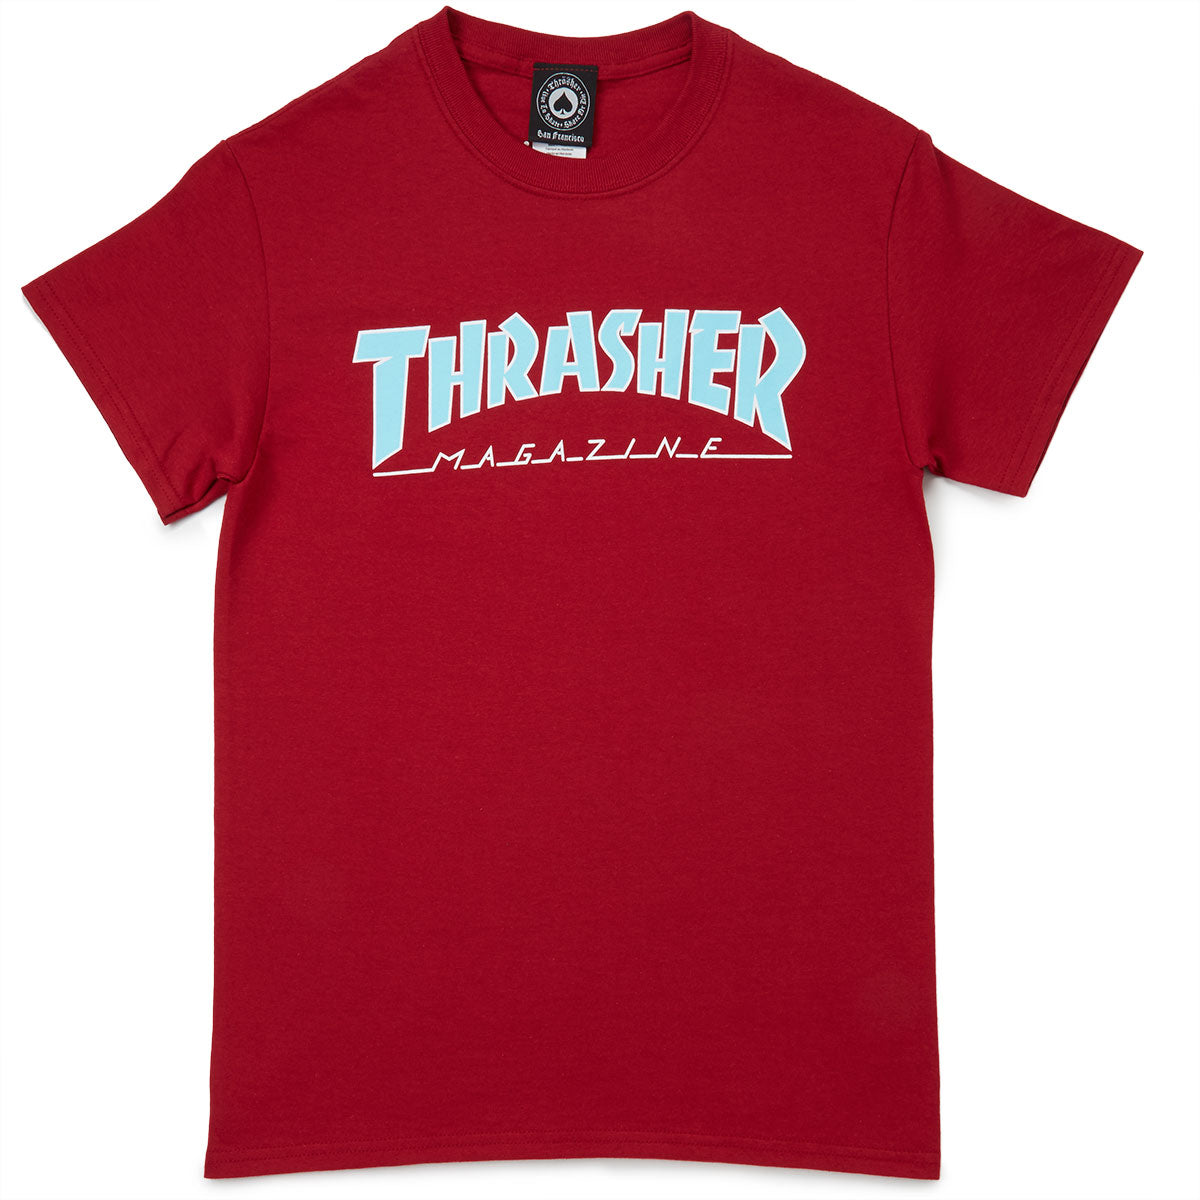 Thrasher Outlined T-Shirt - Cardinal image 1